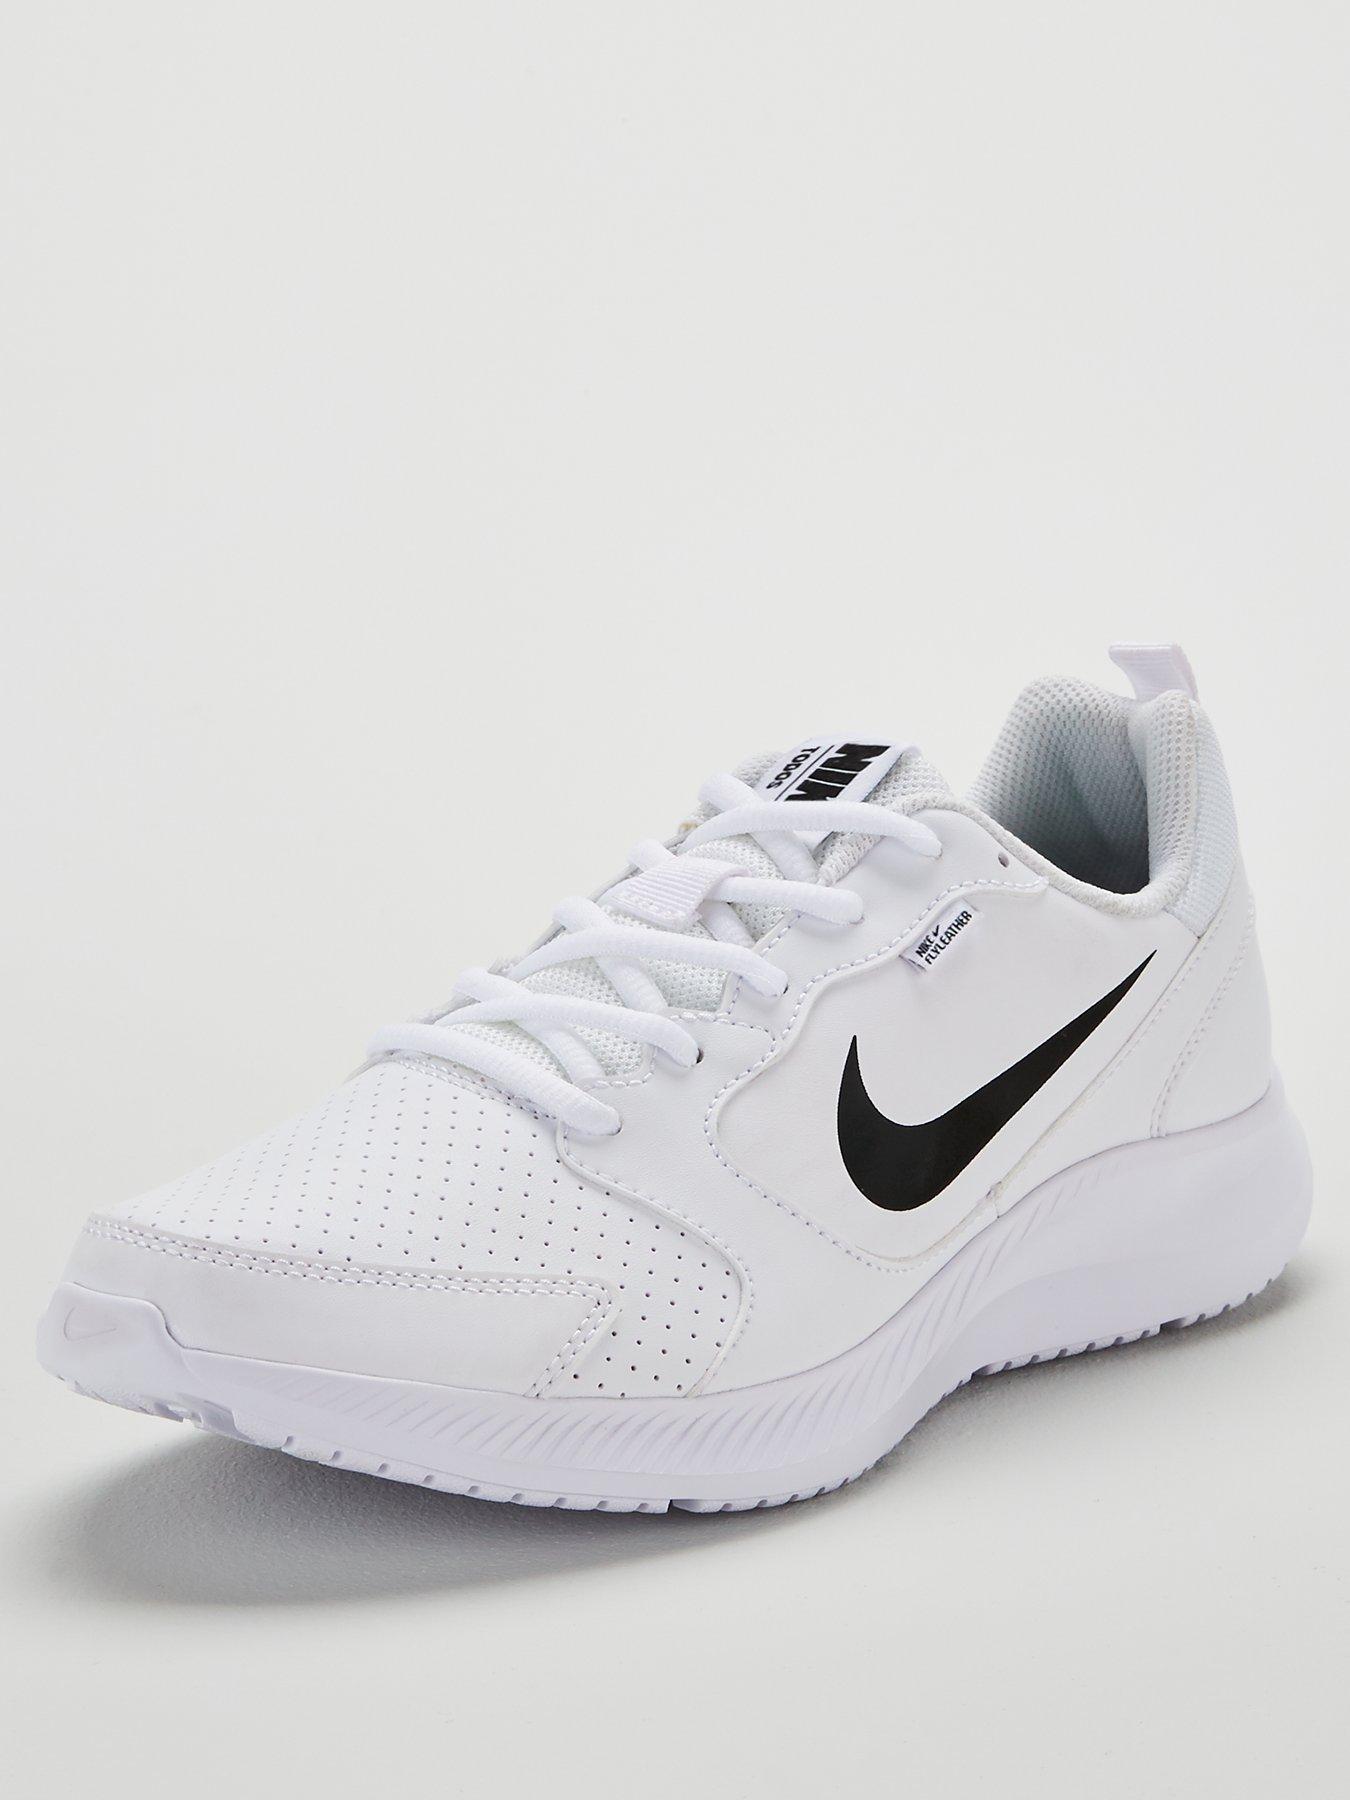 nike white leather trainers womens